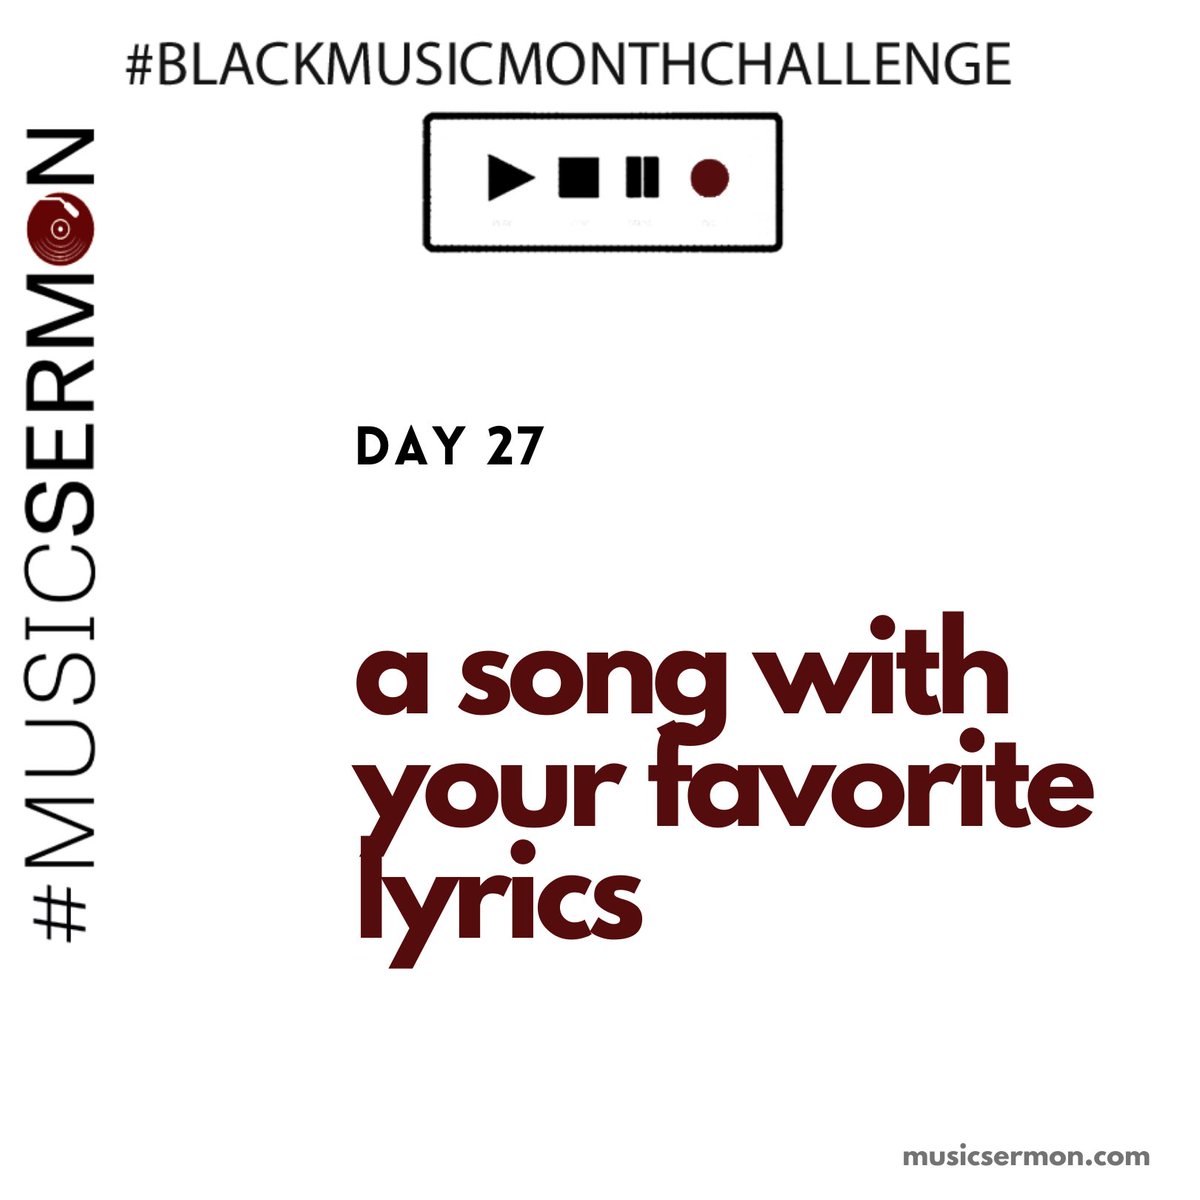 It’s almost the end of June, which means almost the end of the  #BlackMusicMonthChallenge!Like the “perfect song” prompt, I always love seeing your answers to this one. For Day 27, share a song with your favorite lyrics.